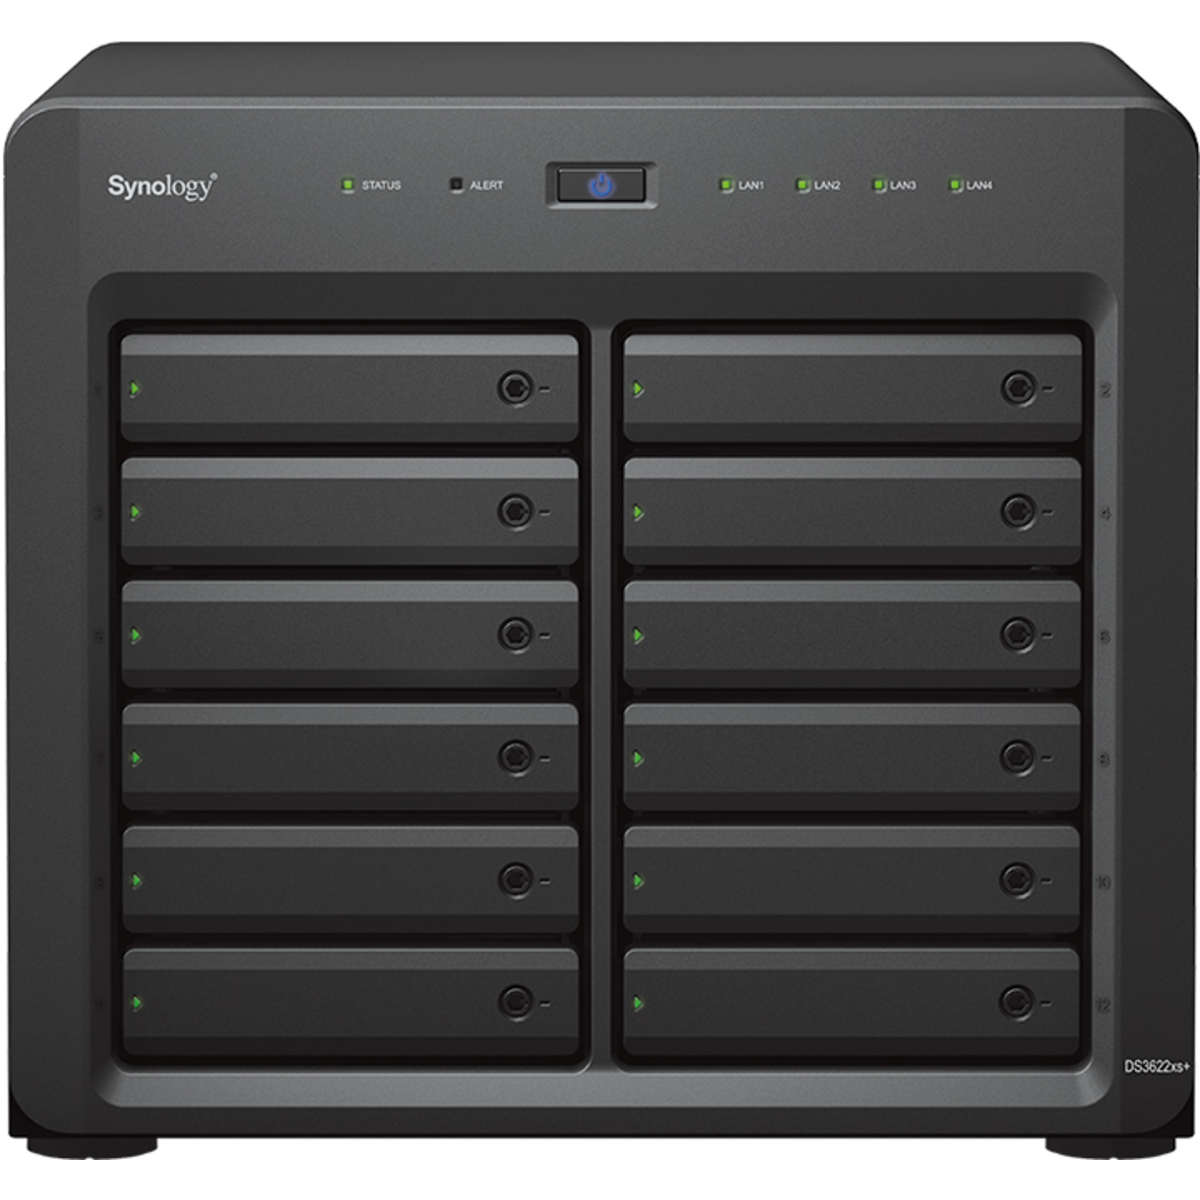 Synology DiskStation DS3622xs+ 22tb 12-Bay Desktop Multimedia / Power User / Business NAS - Network Attached Storage Device 11x2tb Western Digital Red SA500 WDS200T1R0A 2.5 560/530MB/s SATA 6Gb/s SSD NAS Class Drives Installed - Burn-In Tested DiskStation DS3622xs+